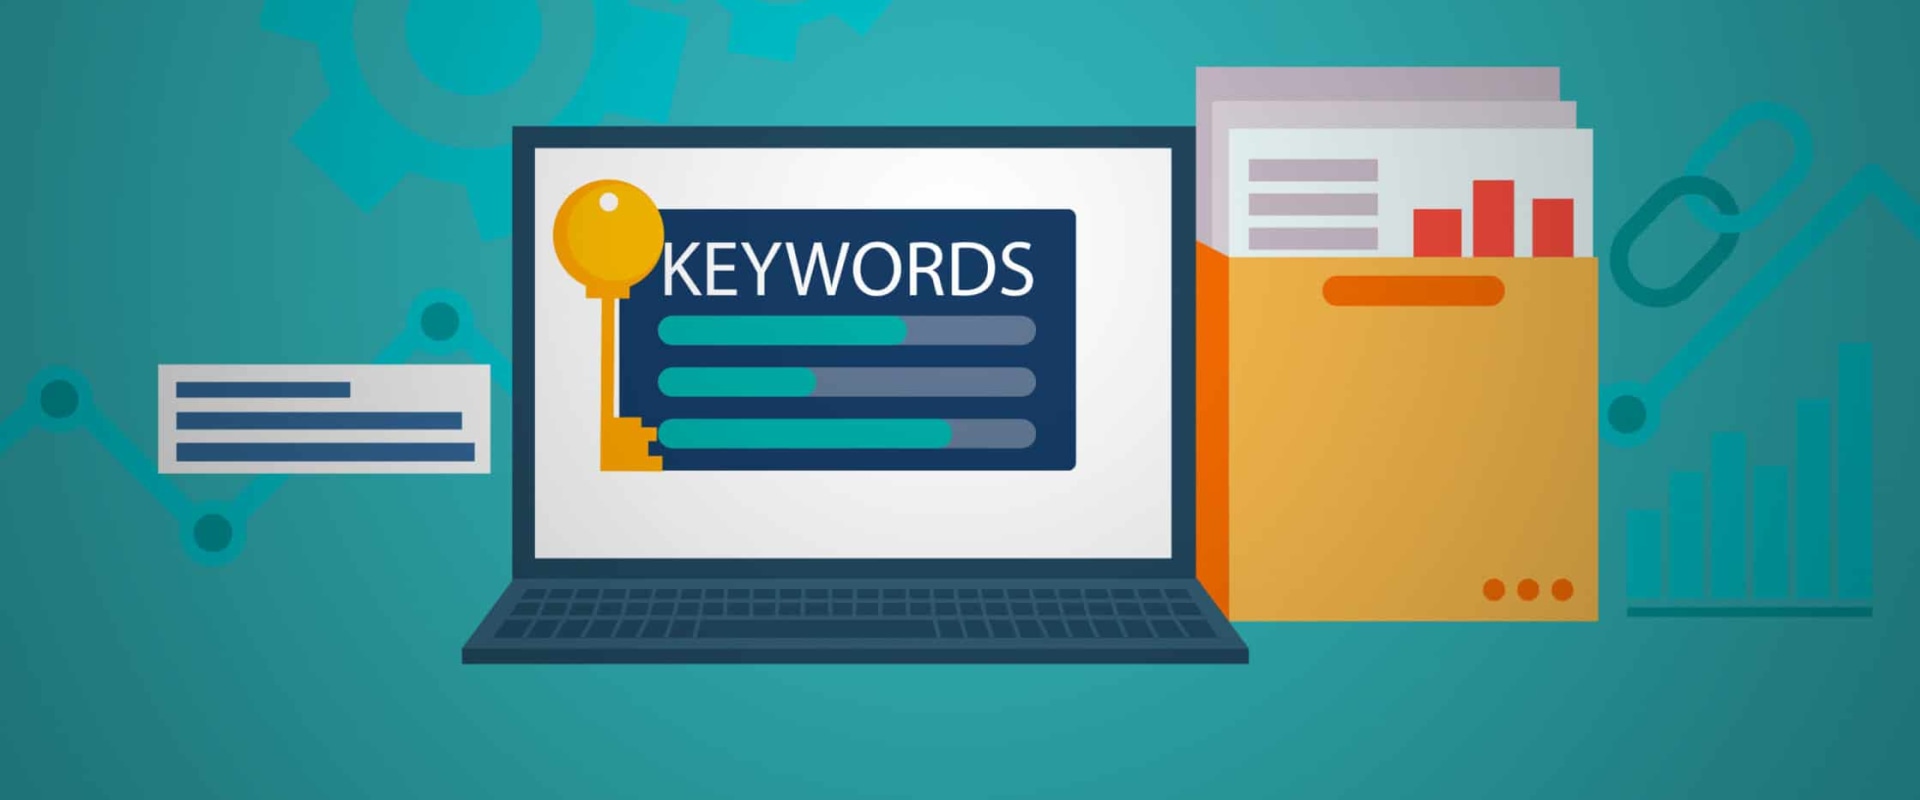 What should you begin your keyword research with?